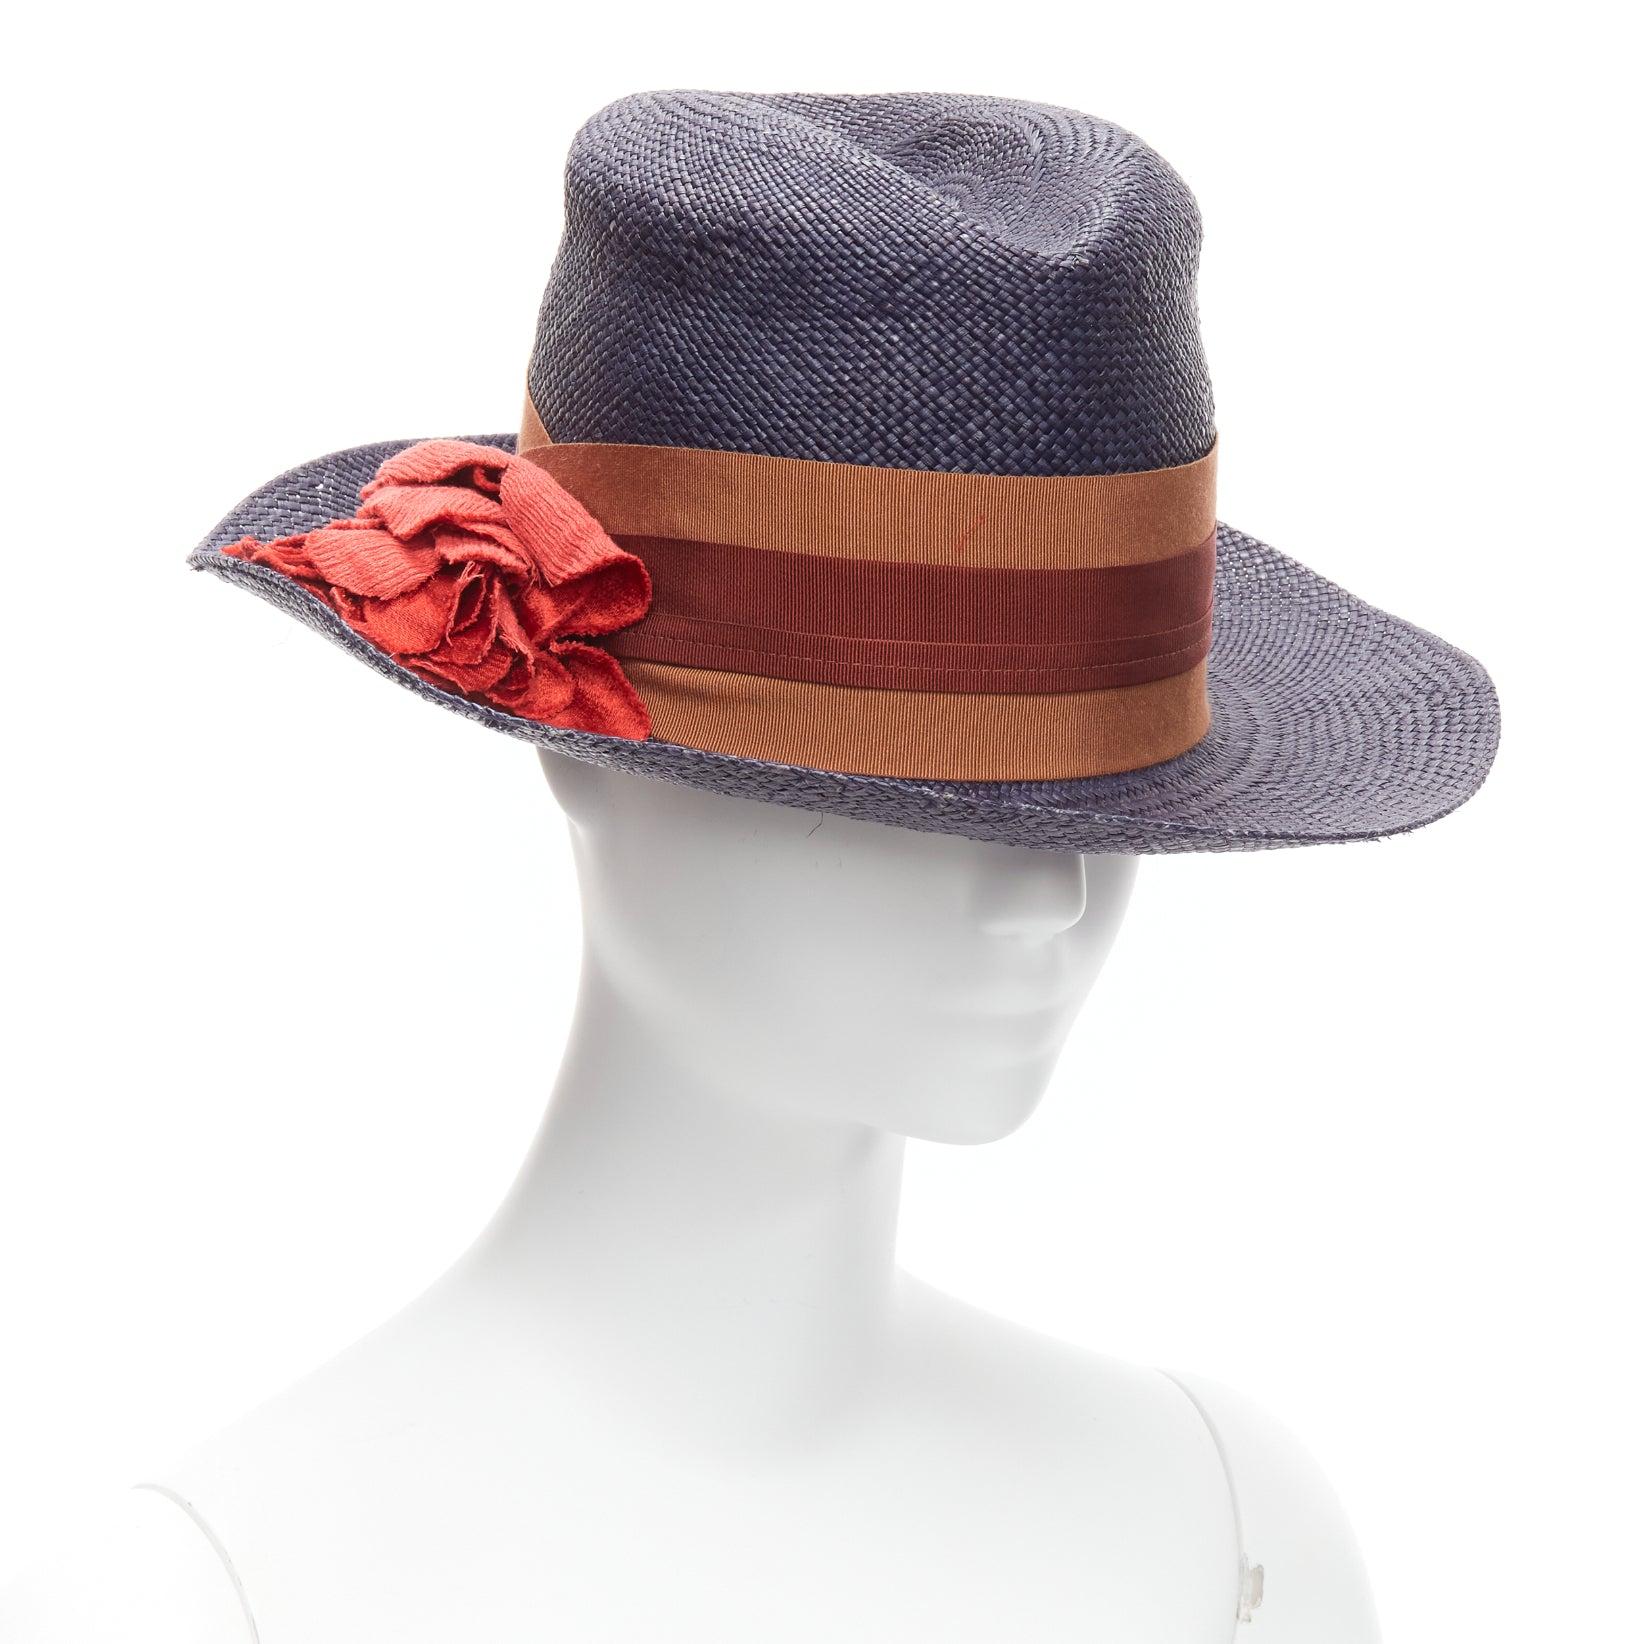 LANVIN 2015 Alber Elbaz red flower brown web ribbon navy straw fedora hat M
Reference: GIYG/A00286
Brand: Lanvin
Designer: Alber Elbaz
Collection: 2015
Material: Straw, Fabric
Color: Navy, Red
Pattern: Floral
Lining: Burgundy Fabric
Extra Details: